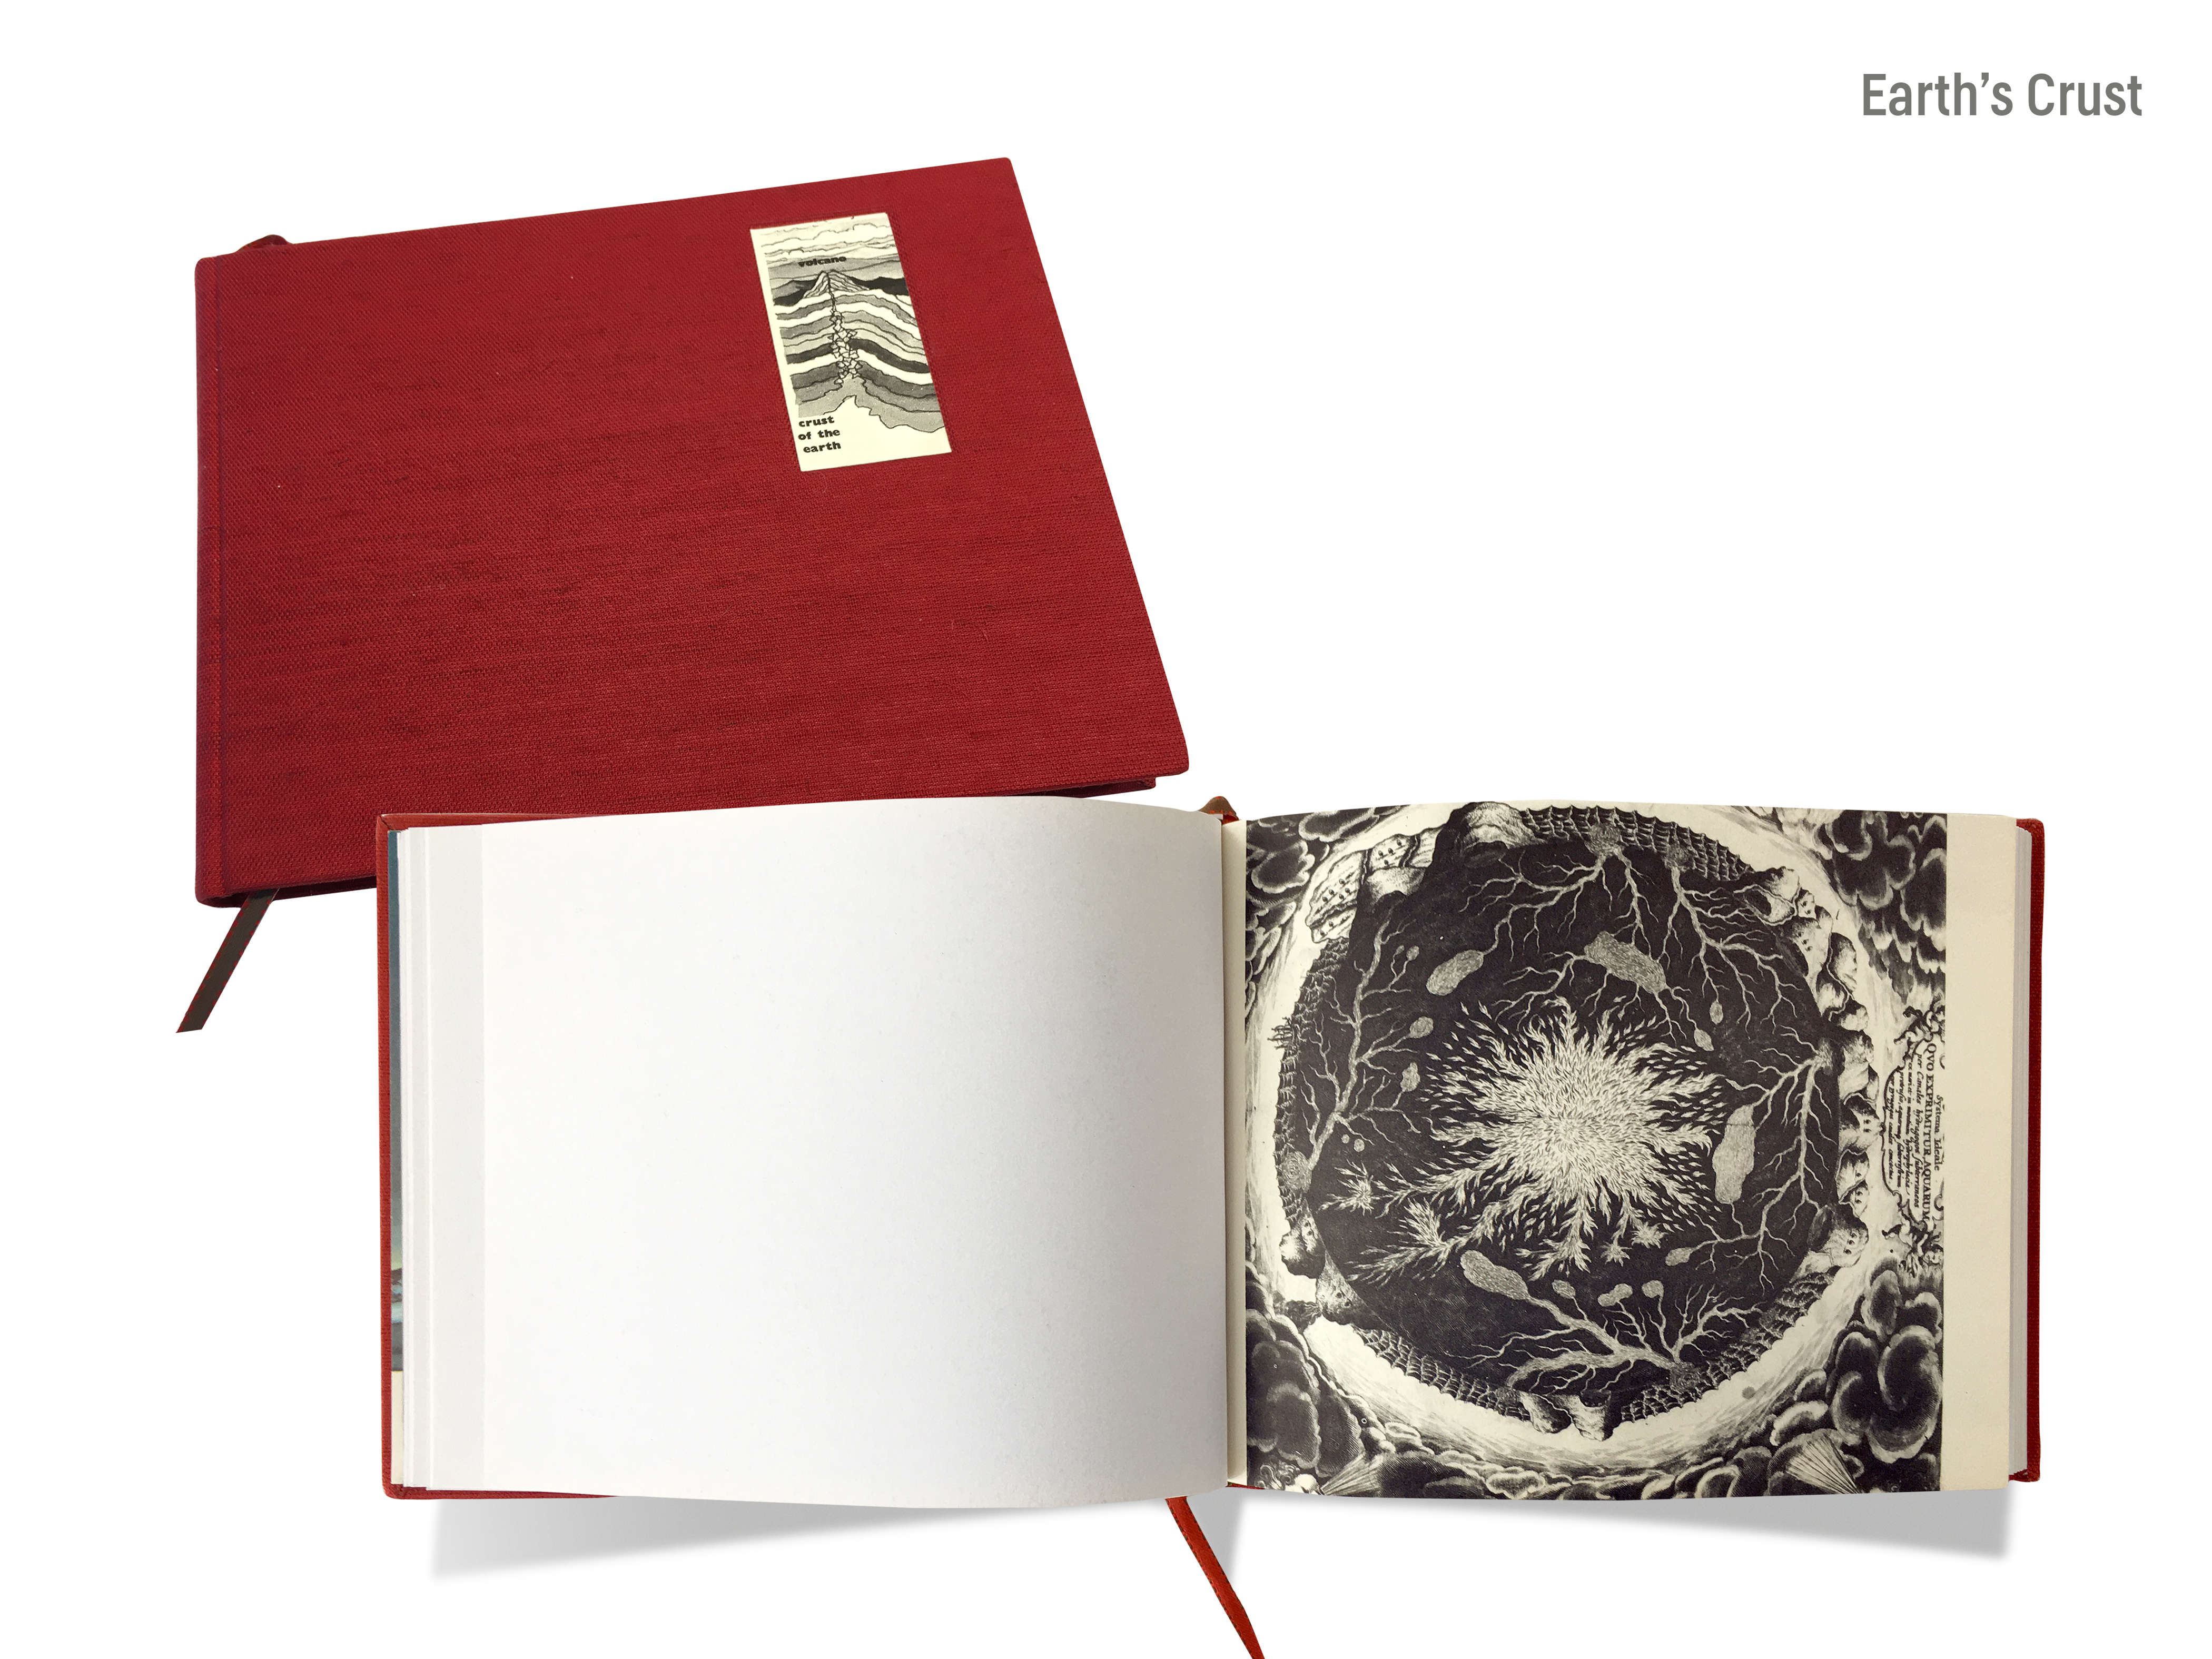 A montage image of a cover and a double-page spread of the hand-made journal titled, ‘Earth’s crust’ by Michael Small, featuring a deep red linen cover with a diagram of the geologic layers of a volcano and a double-page spread with a blank page and a line engraving of a the Earth’s geological systems.